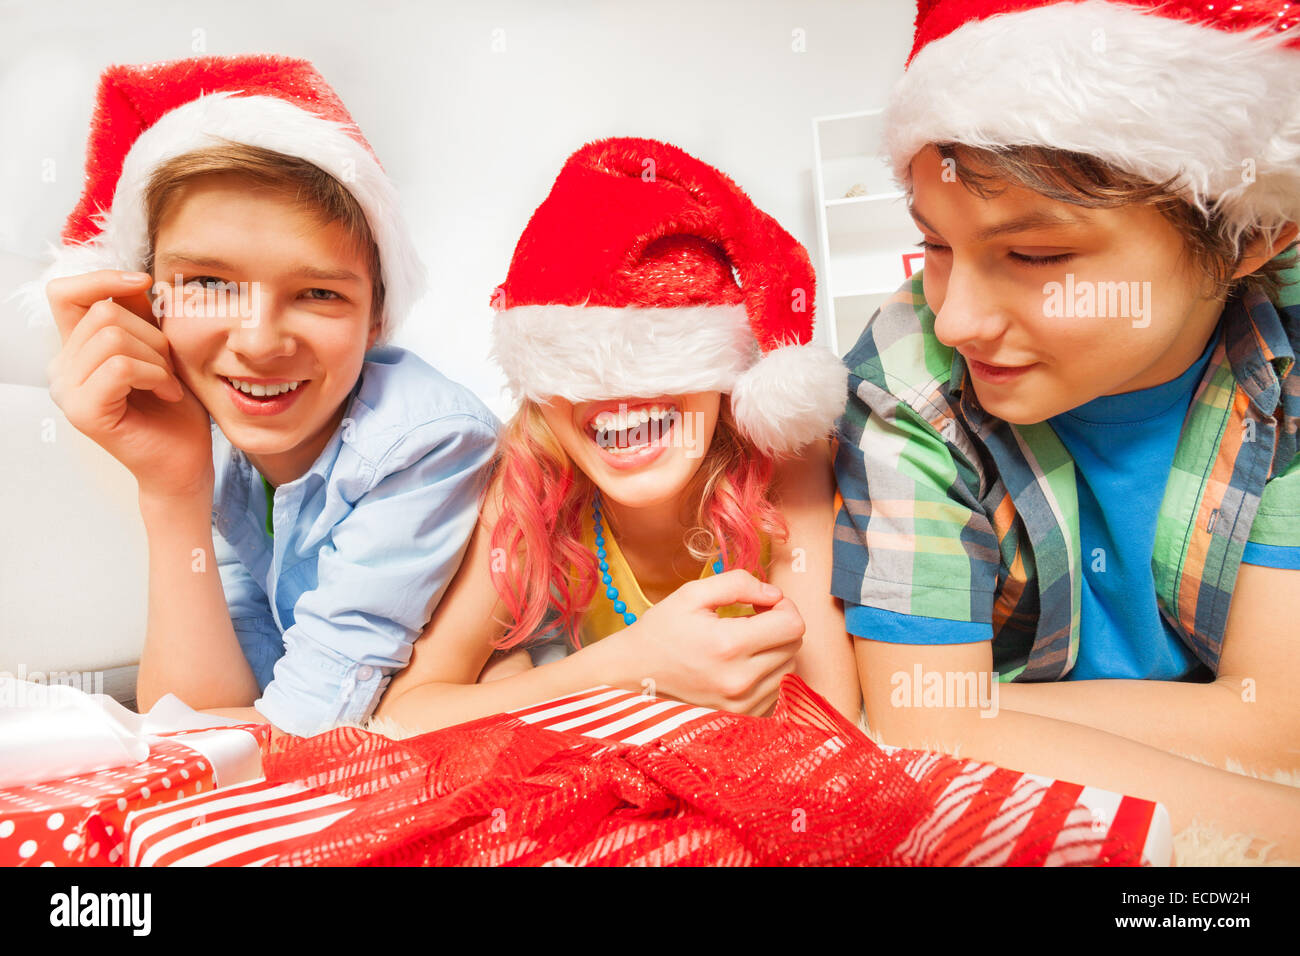 Fun for teens on New year party with Santa hats Stock Photo